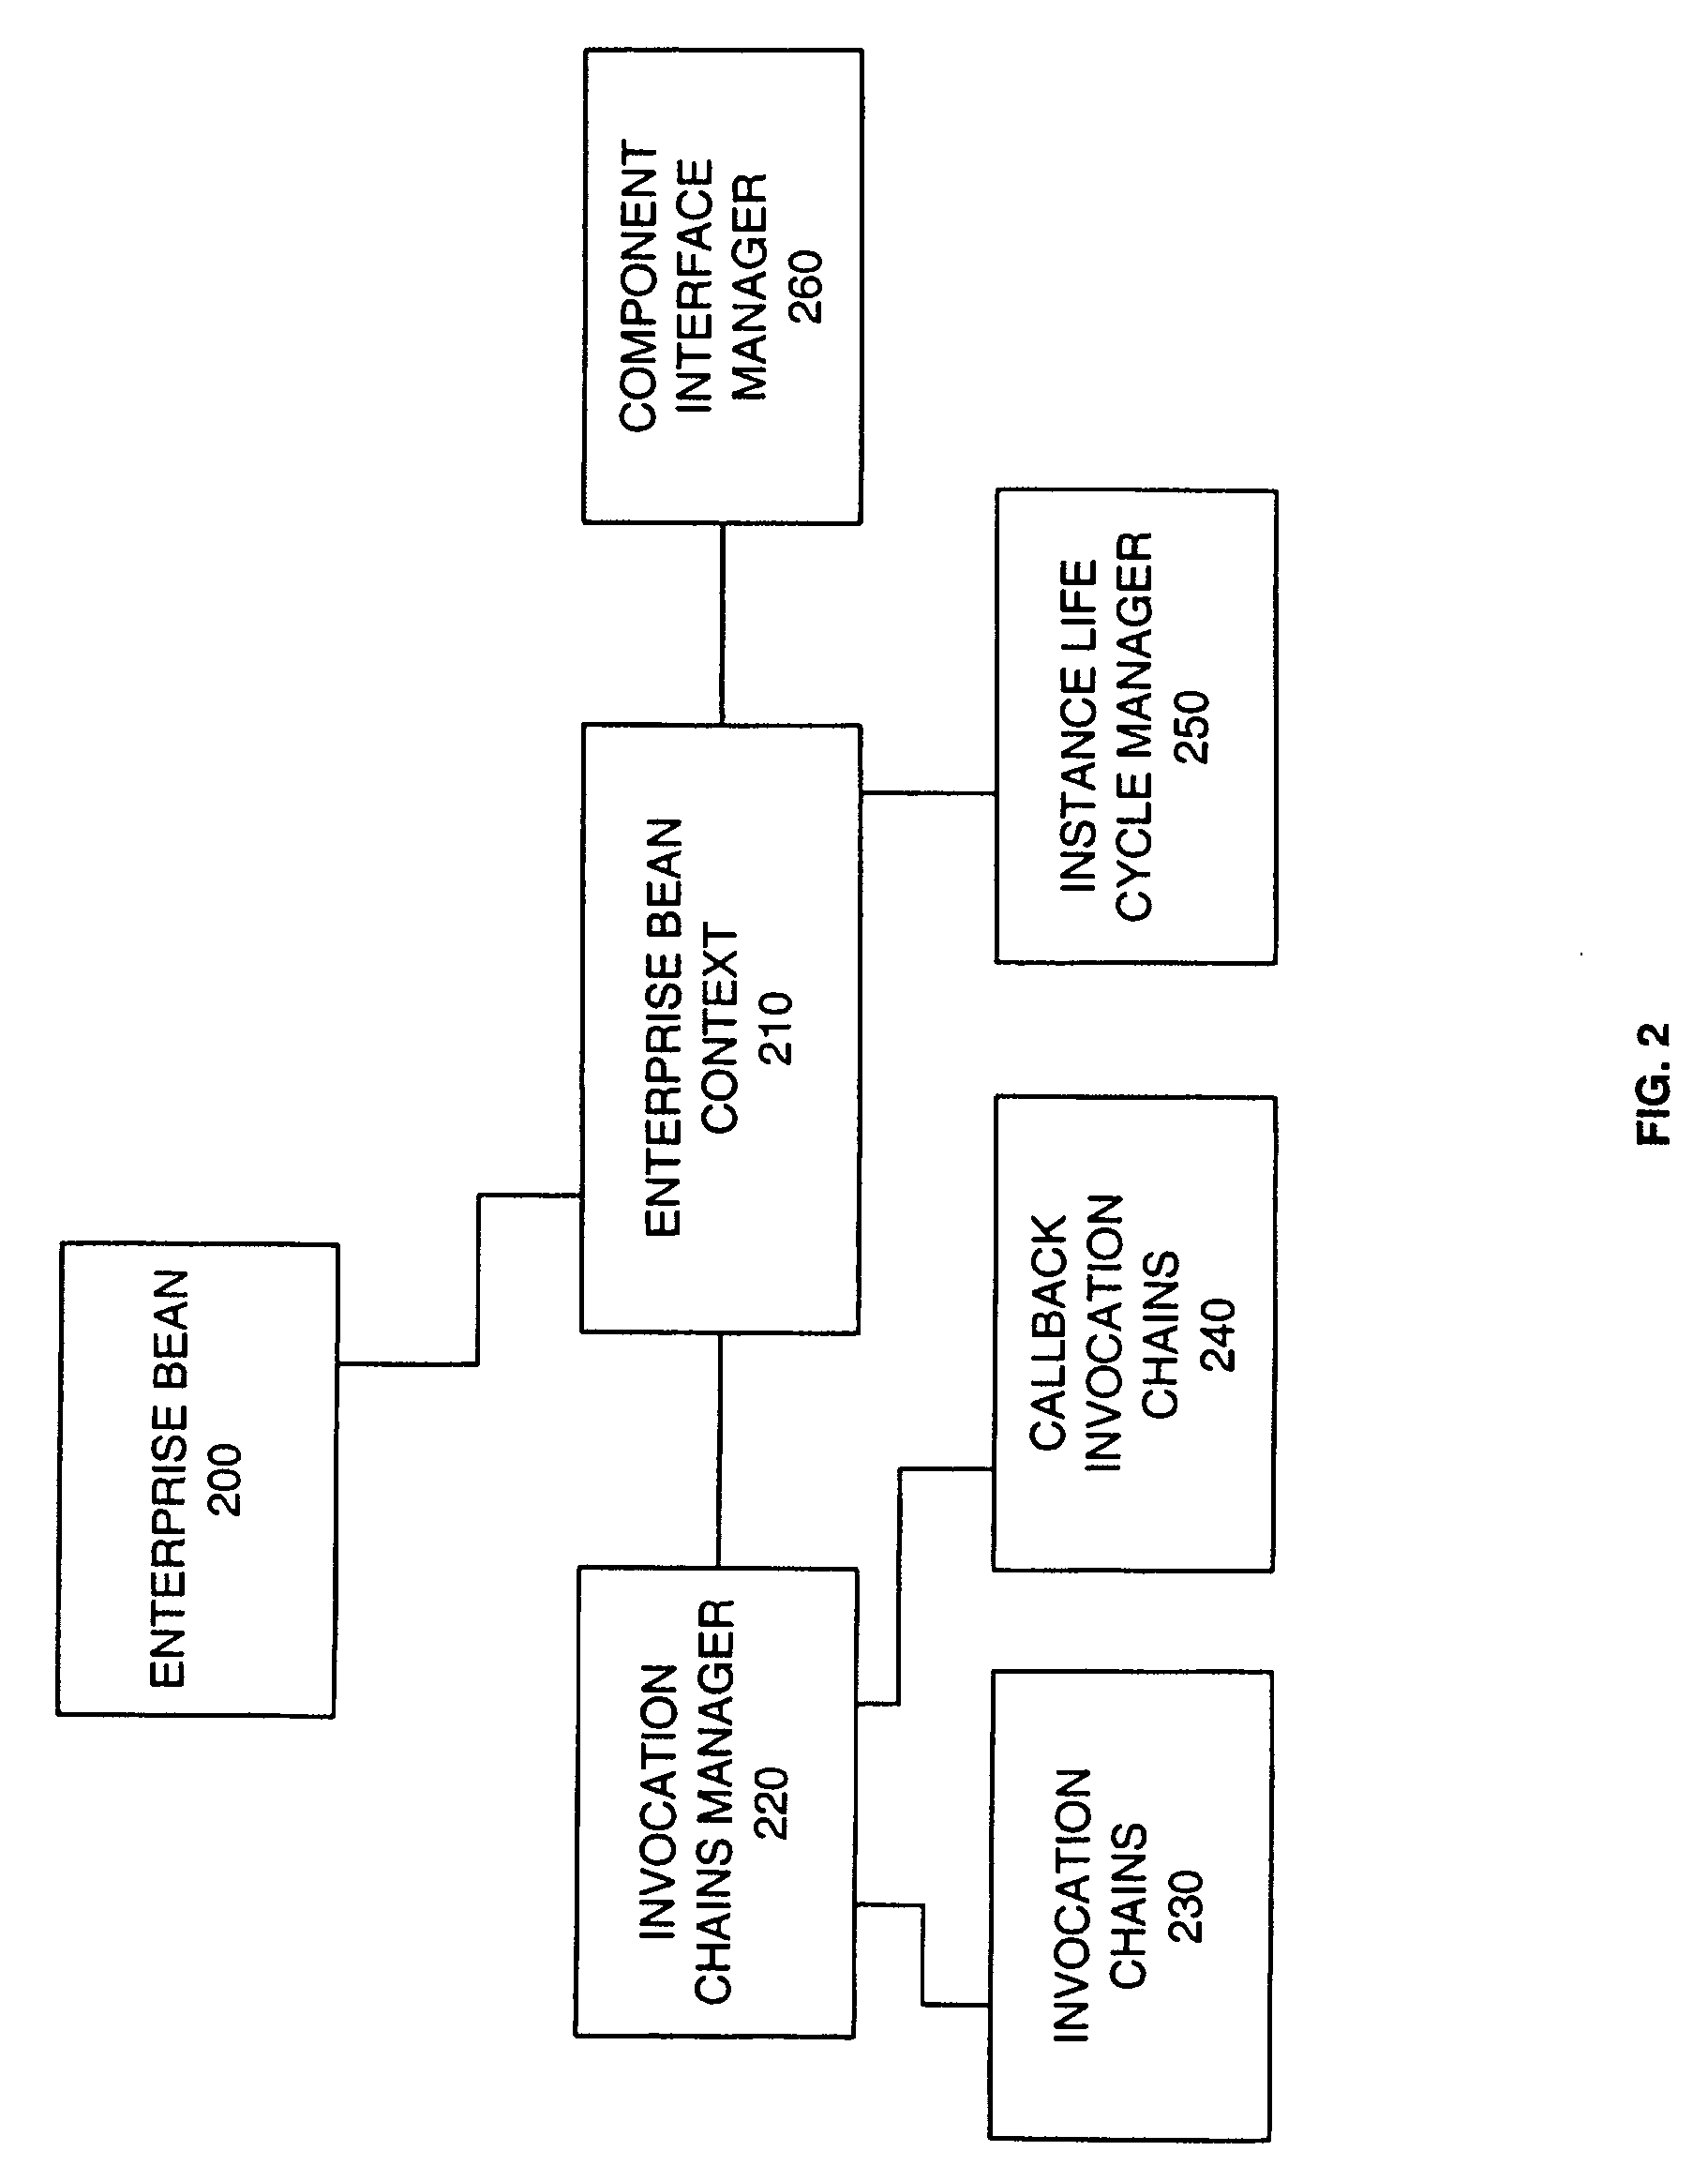 System and method for enterprise javabeans container